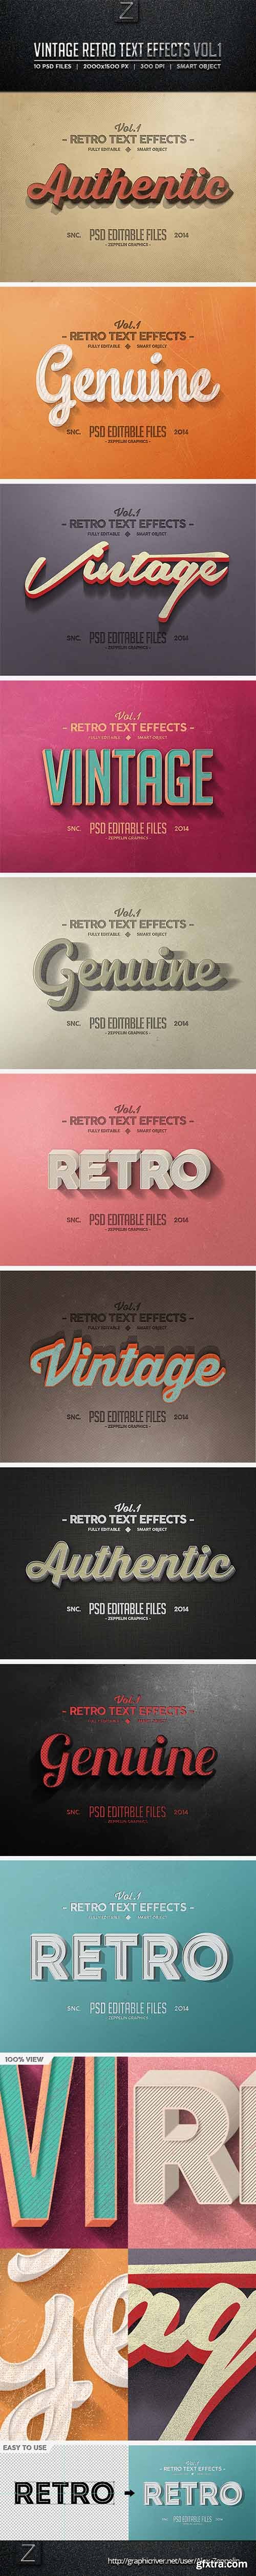 Graphicriver - Vintage Text Effects Vol.1 8286248